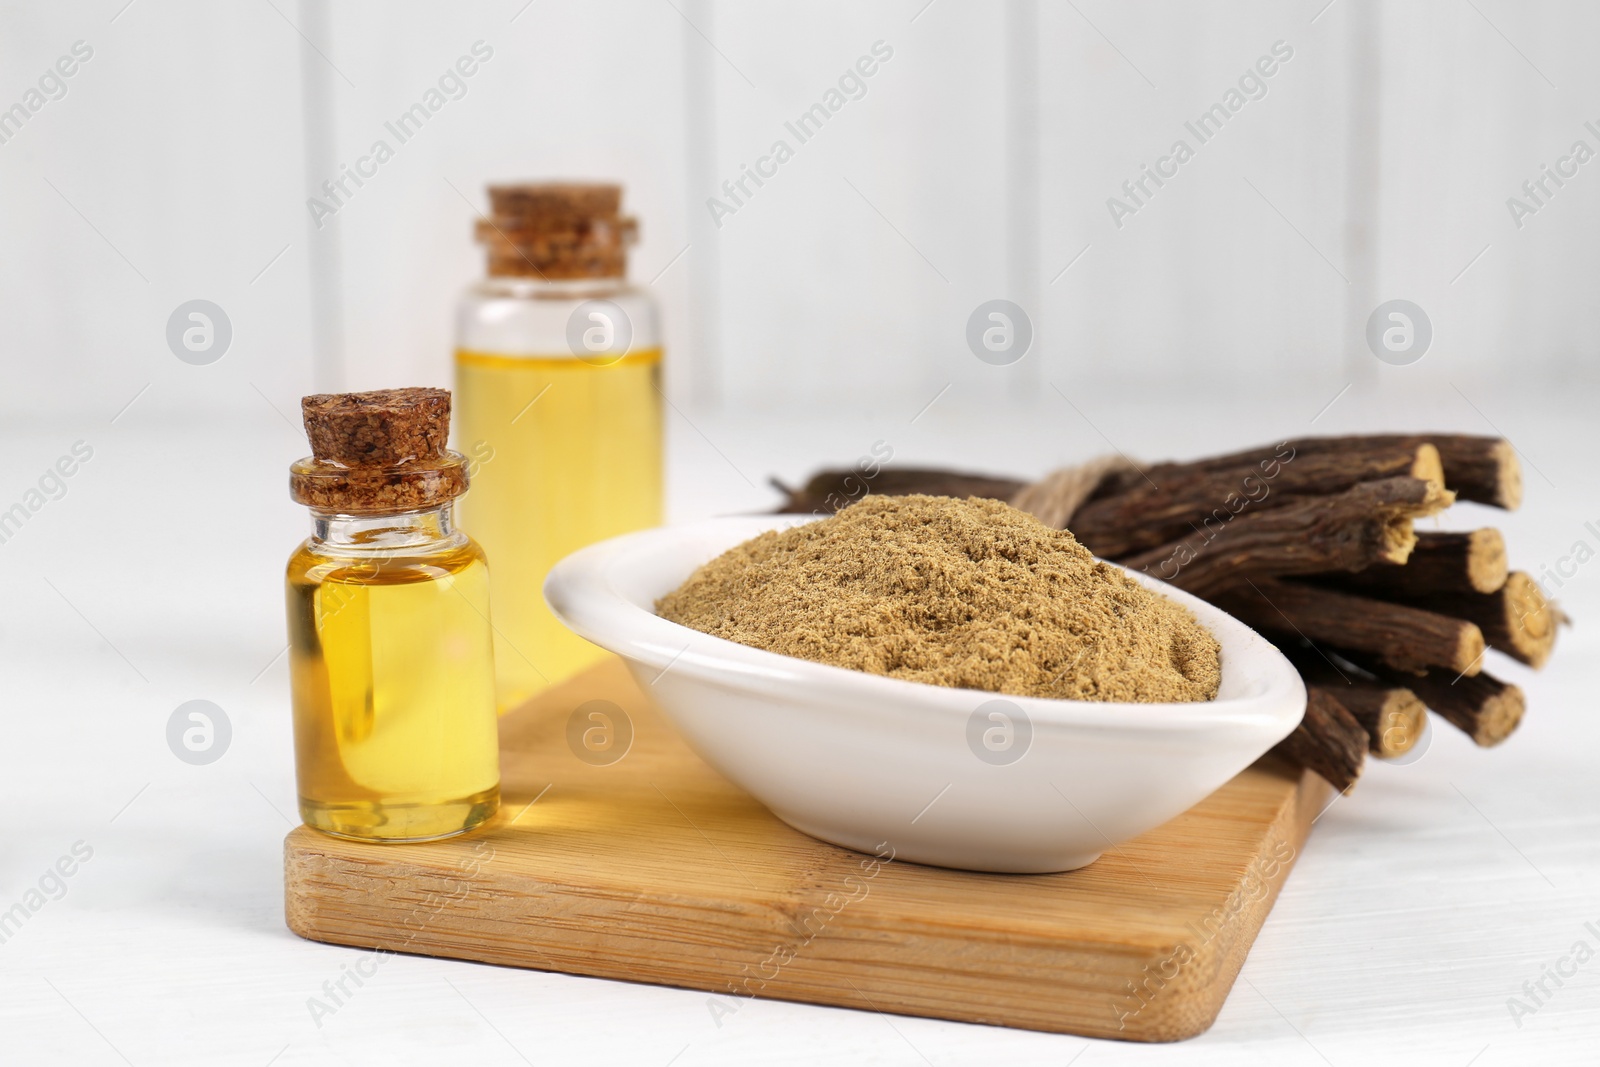 Photo of Dried sticks of licorice roots, bottles with essential oil and powder on white wooden table